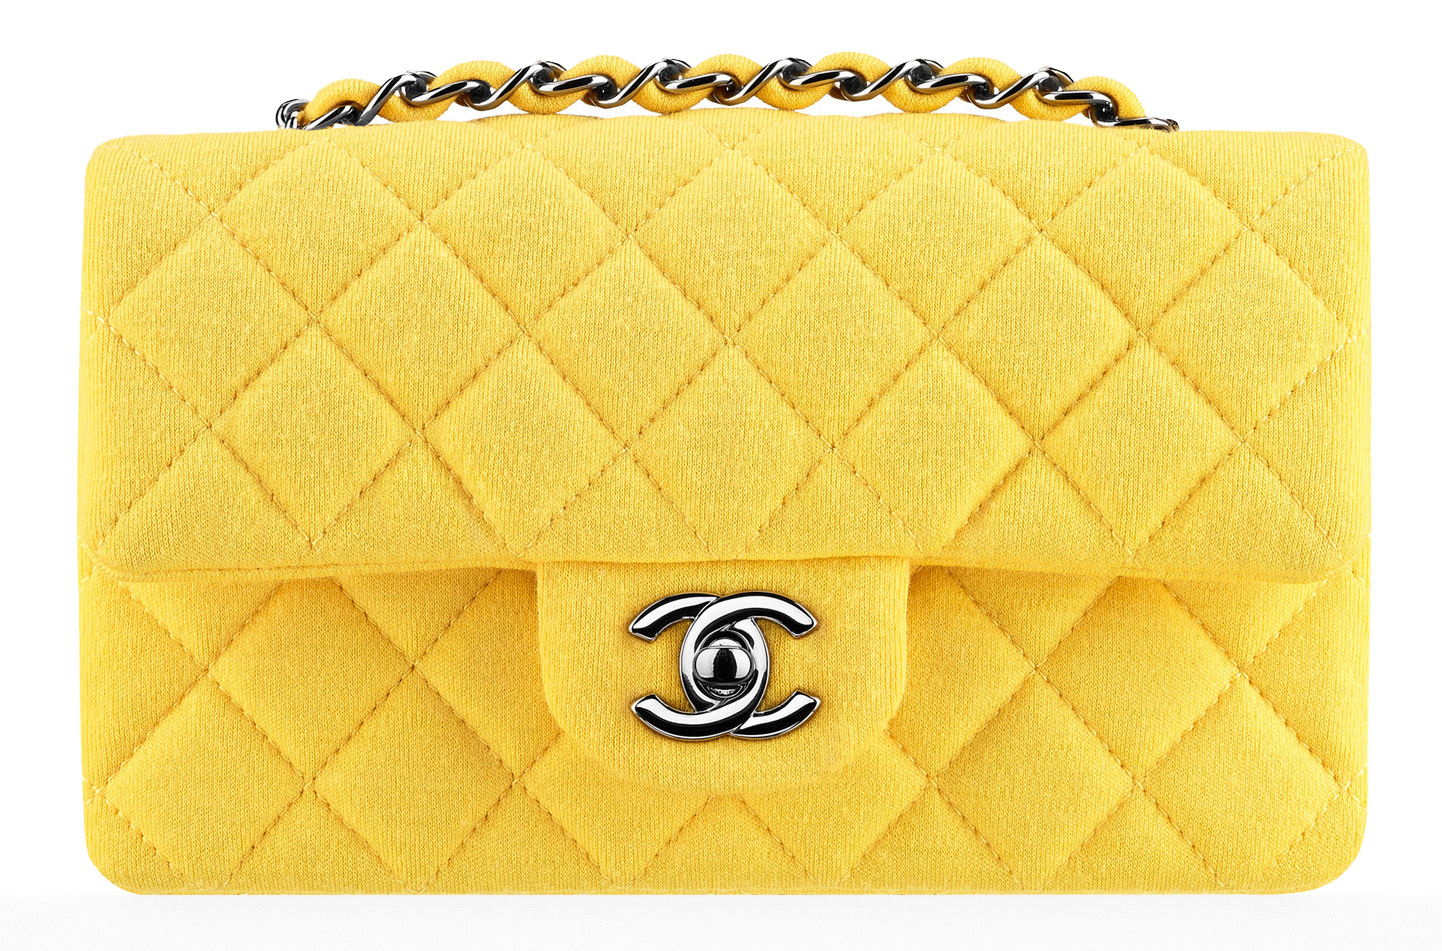 Chanel-Small-Jersey-Classic-Flap-Bag-Yellow